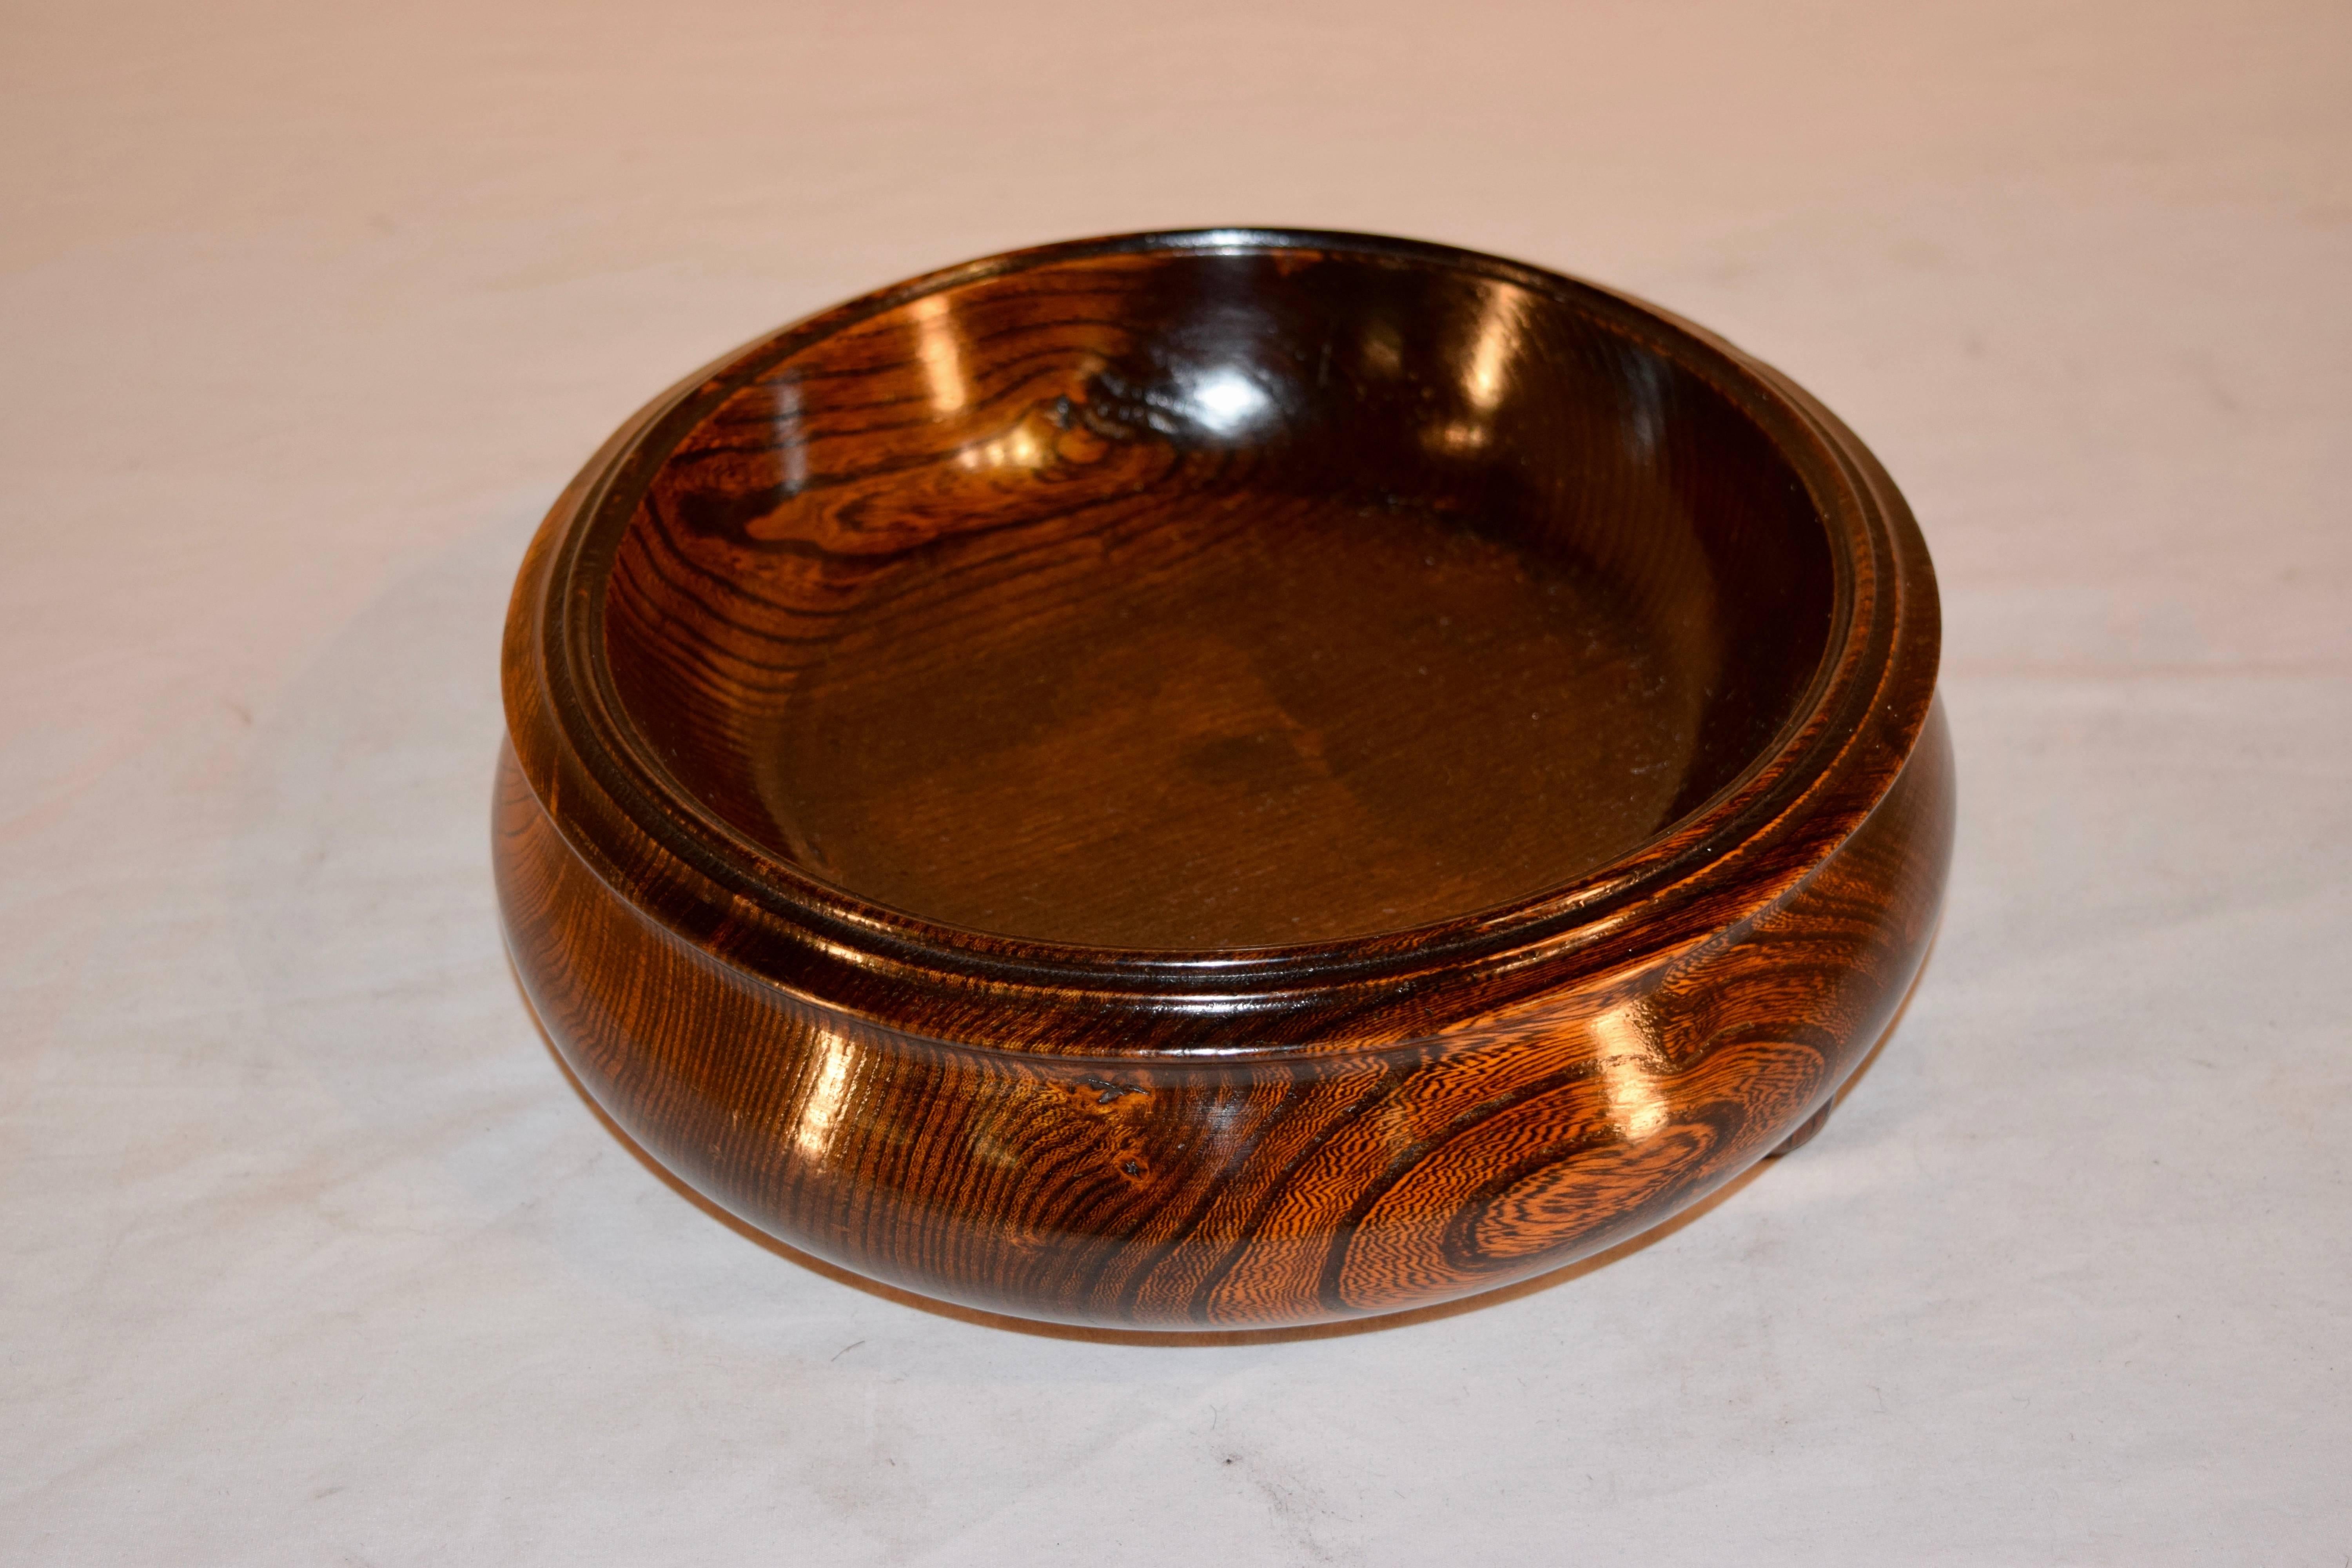 19th century hand-turned bowl from England. Made from oak with turned feet.